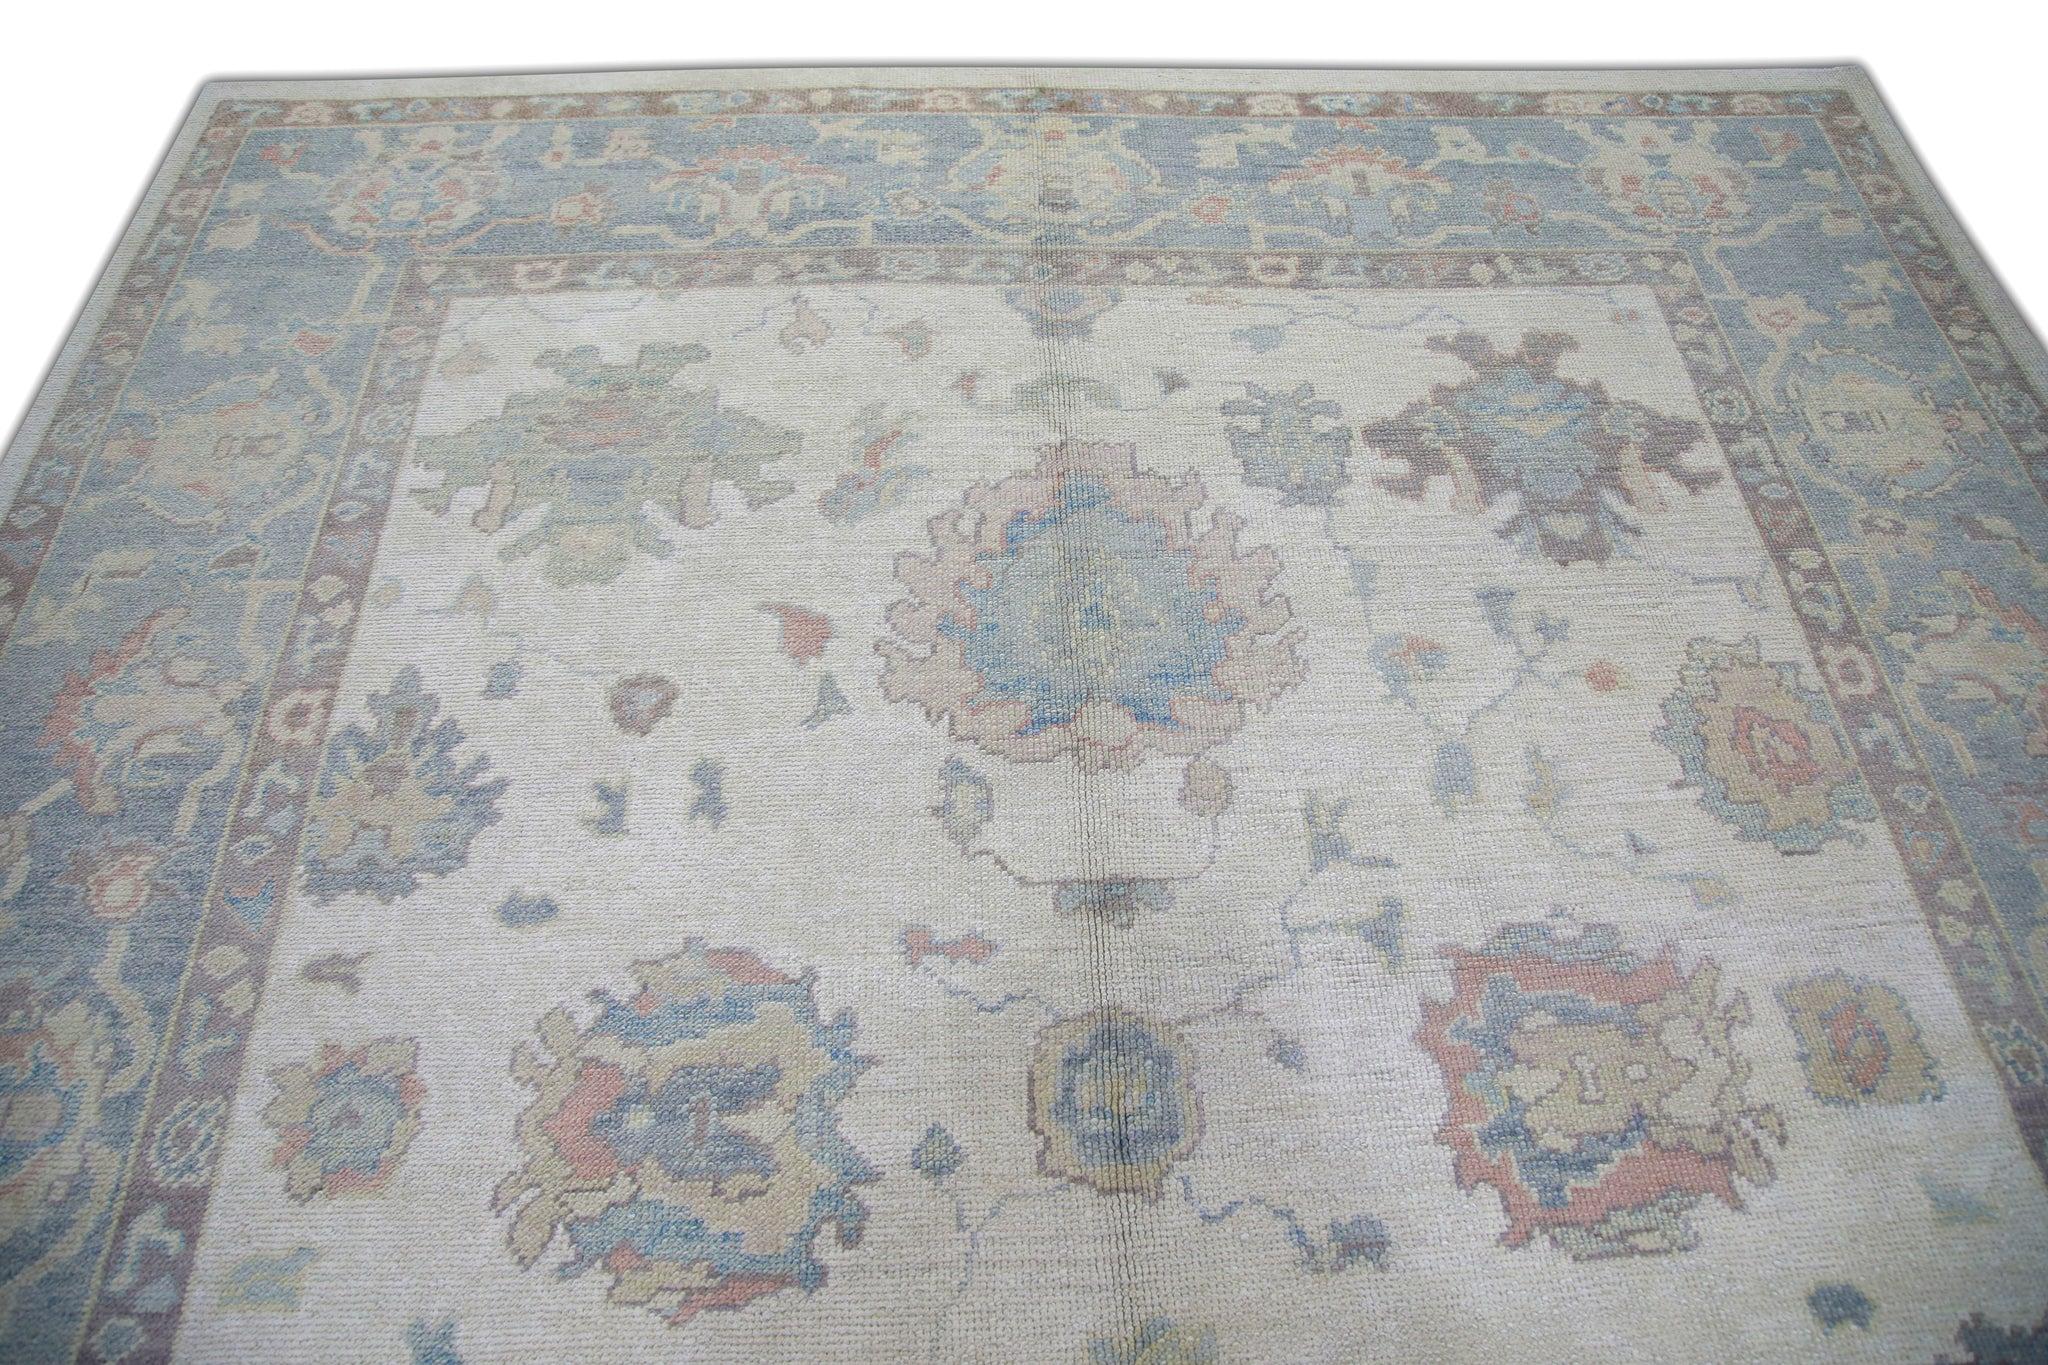 Vegetable Dyed Handwoven Wool Turkish Oushak Rug in Blue Floral Pattern 8'5